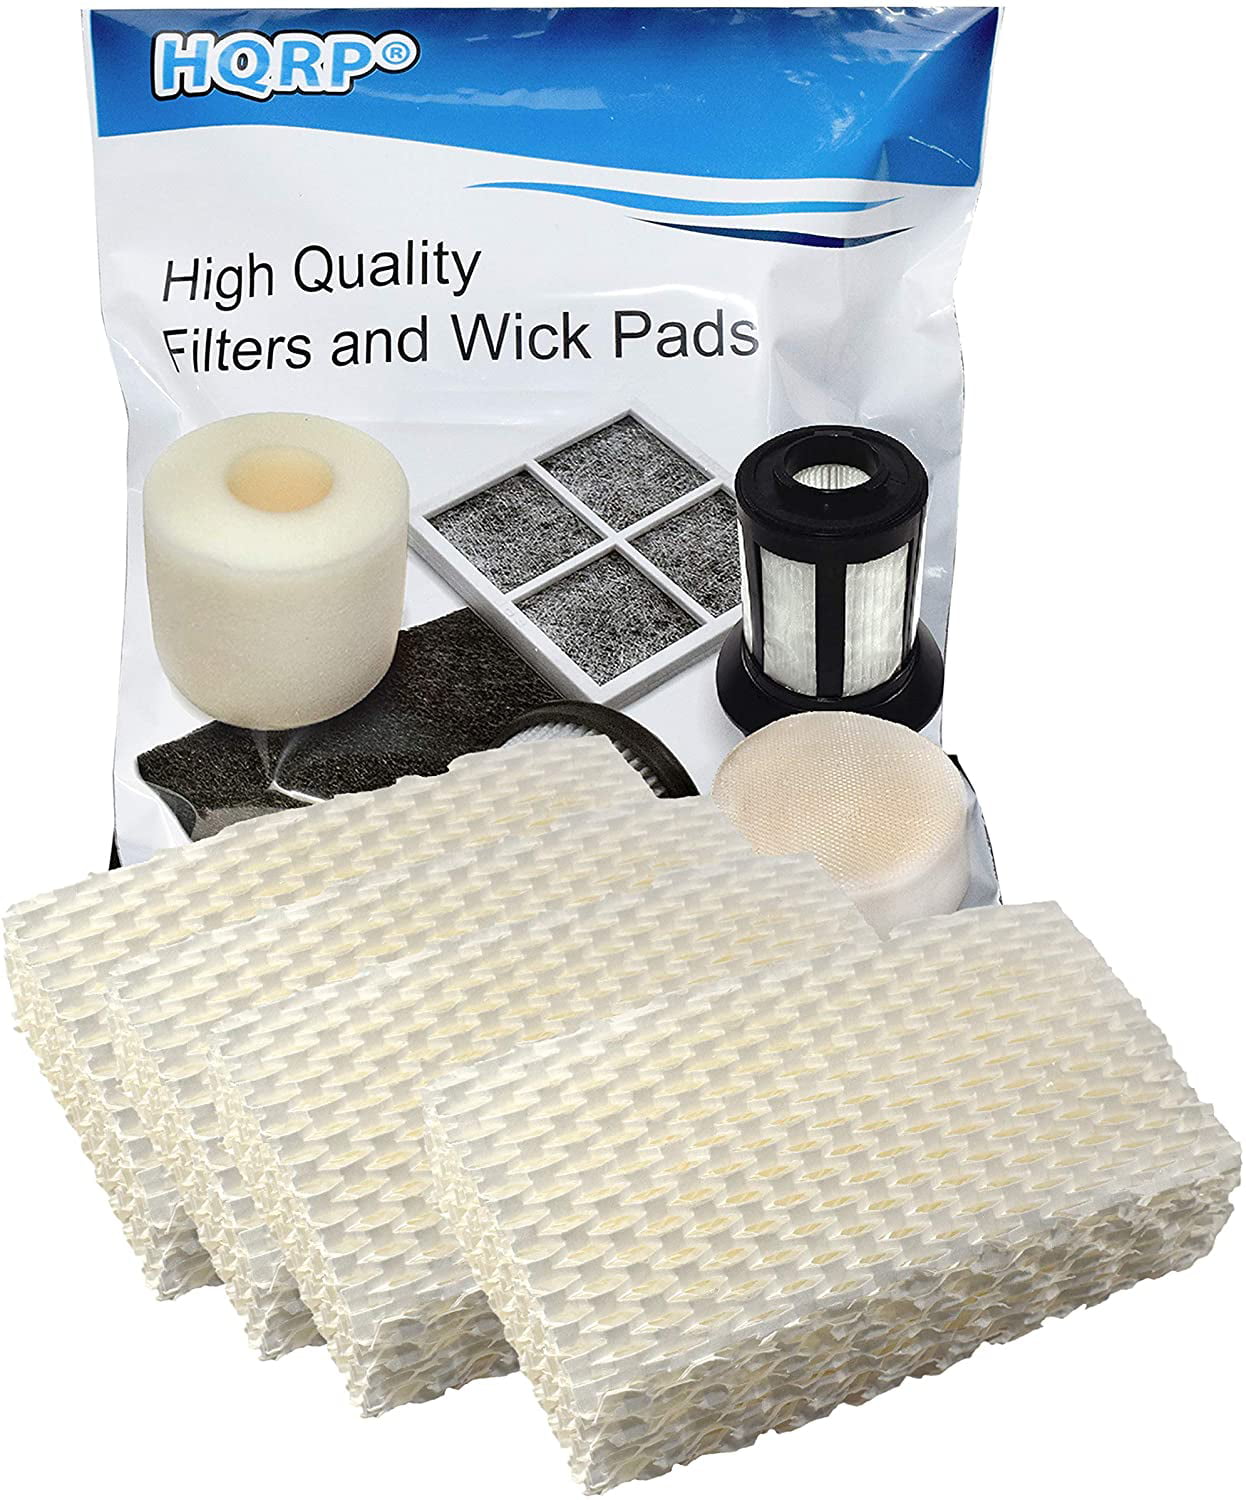 HQRP Humidifier Wick Filter for Relion WF813 RCM832 RCM-832 RCM-832N D13-C HC832 